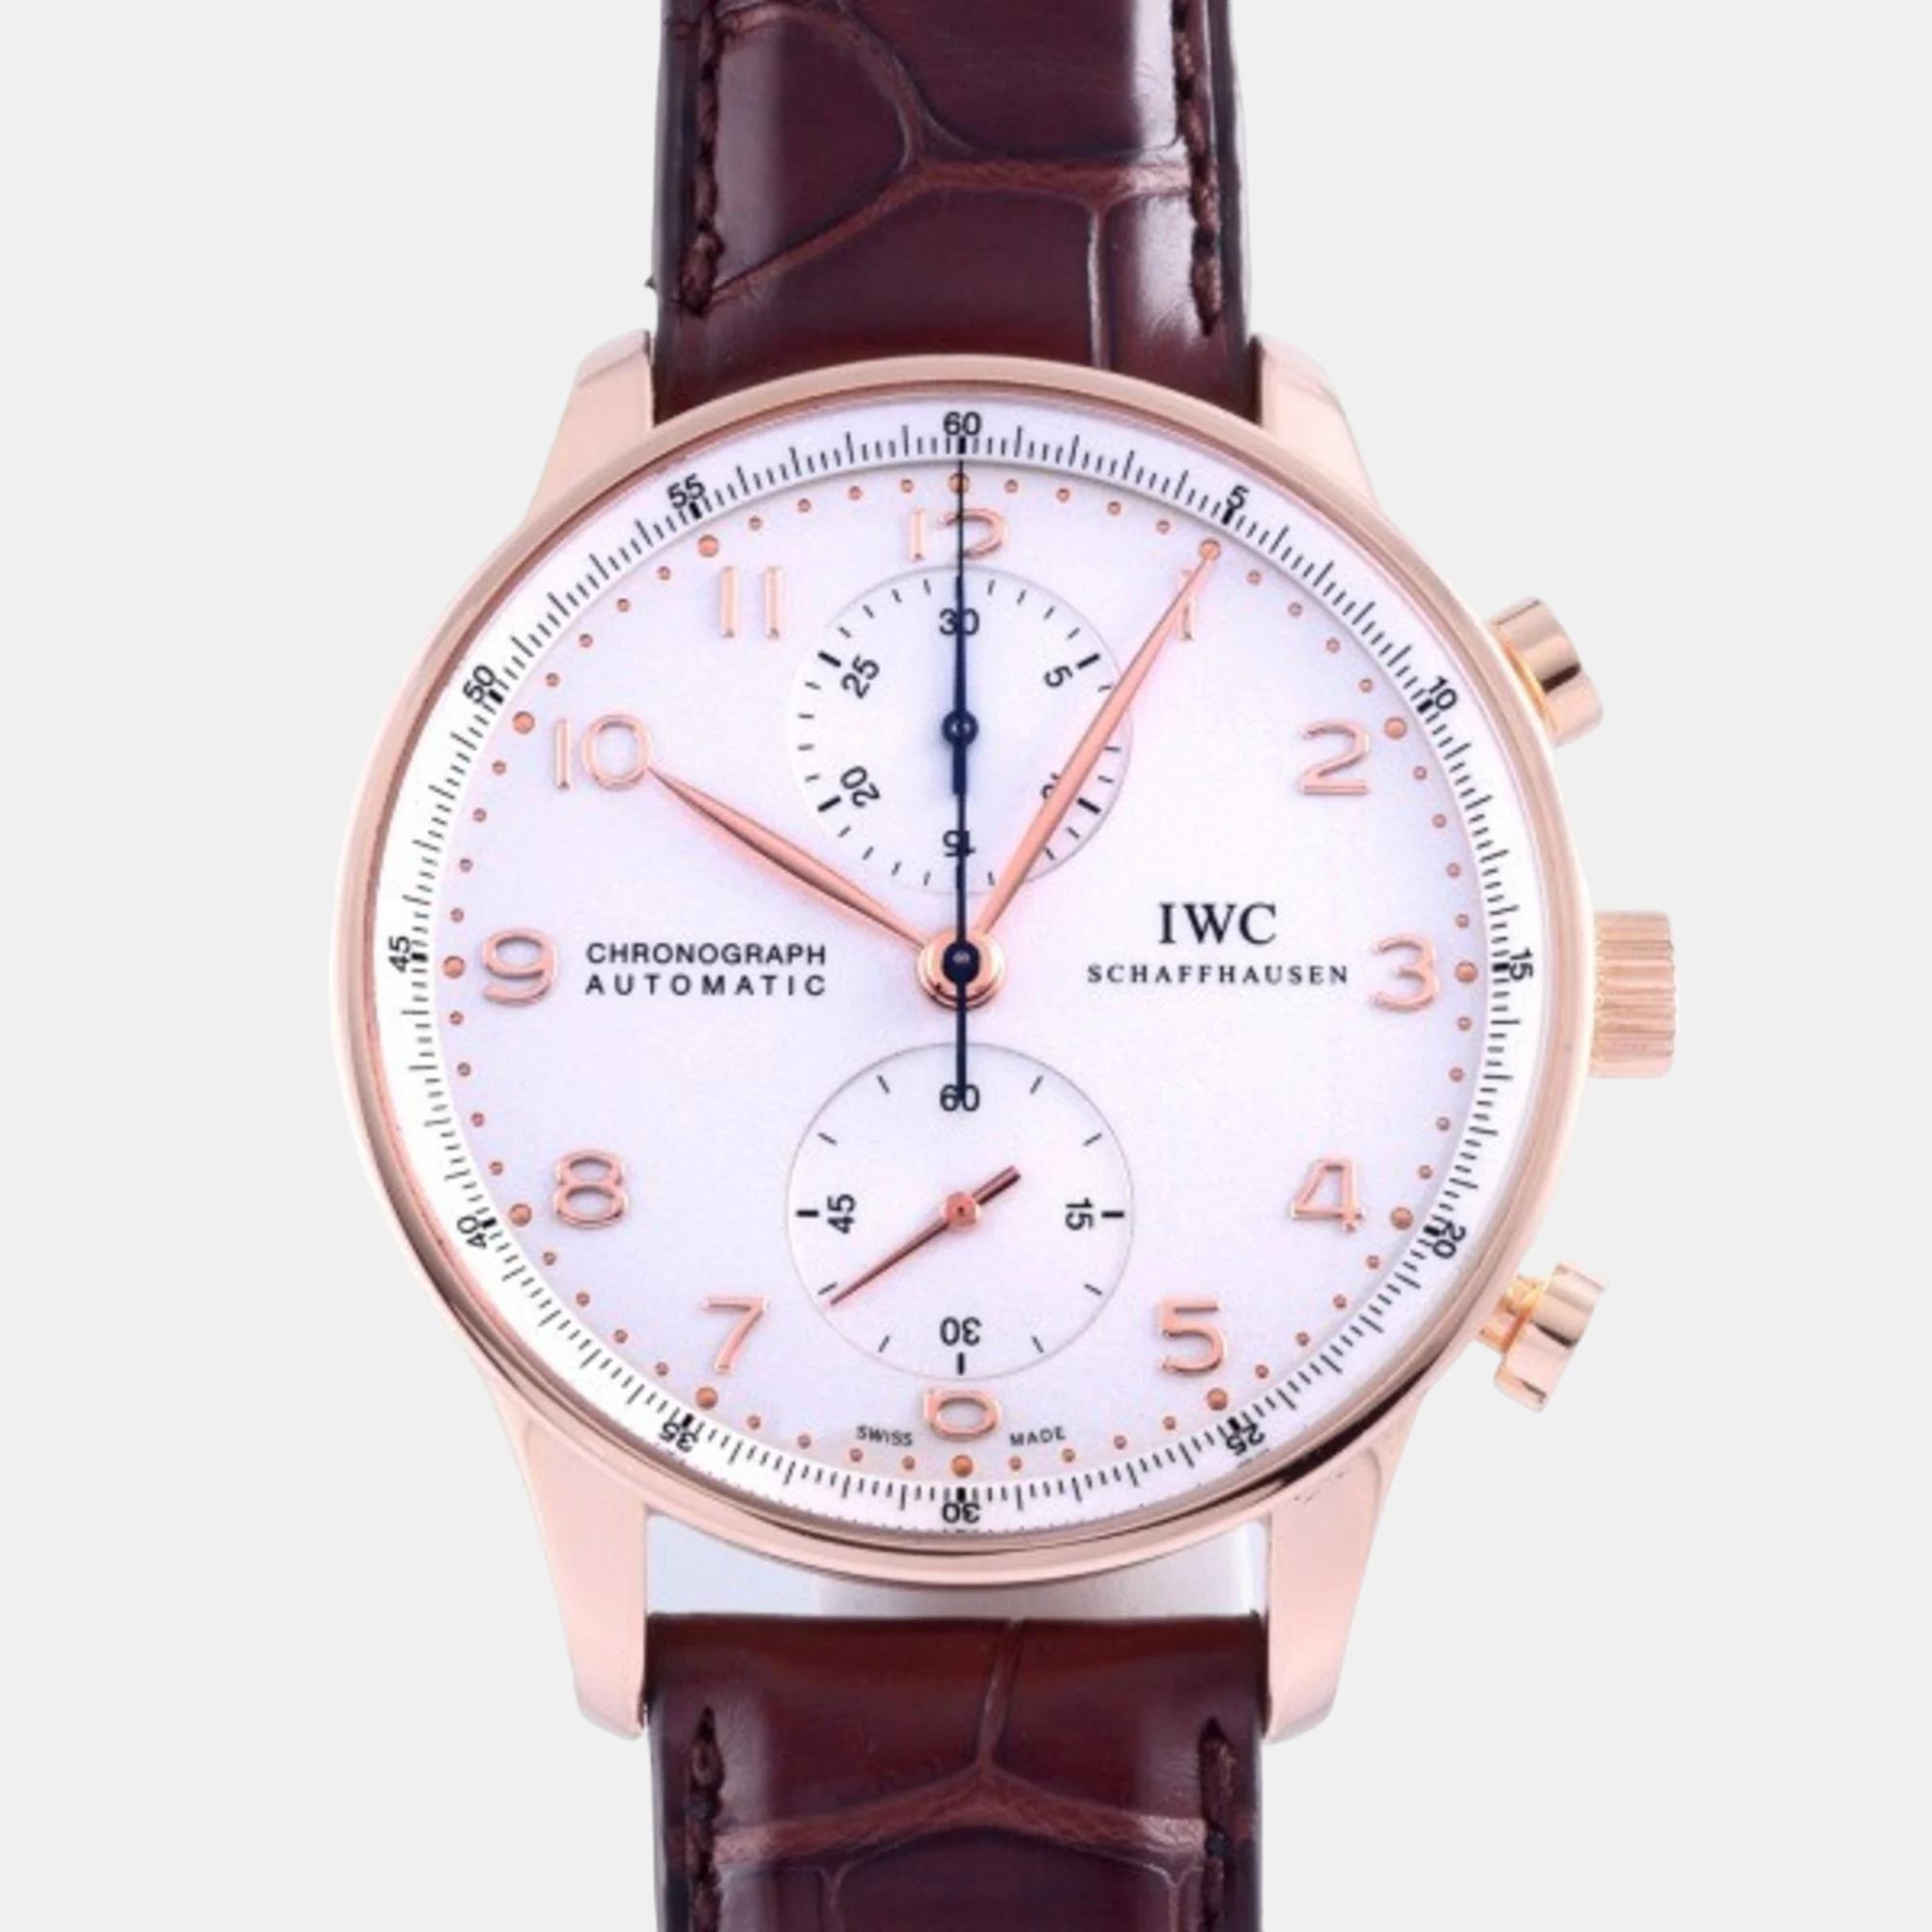 Pre-owned Iwc Schaffhausen Silver 18k Rose Gold Portugieser Iw371480 Automatic Men's Wristwatch 41 Mm